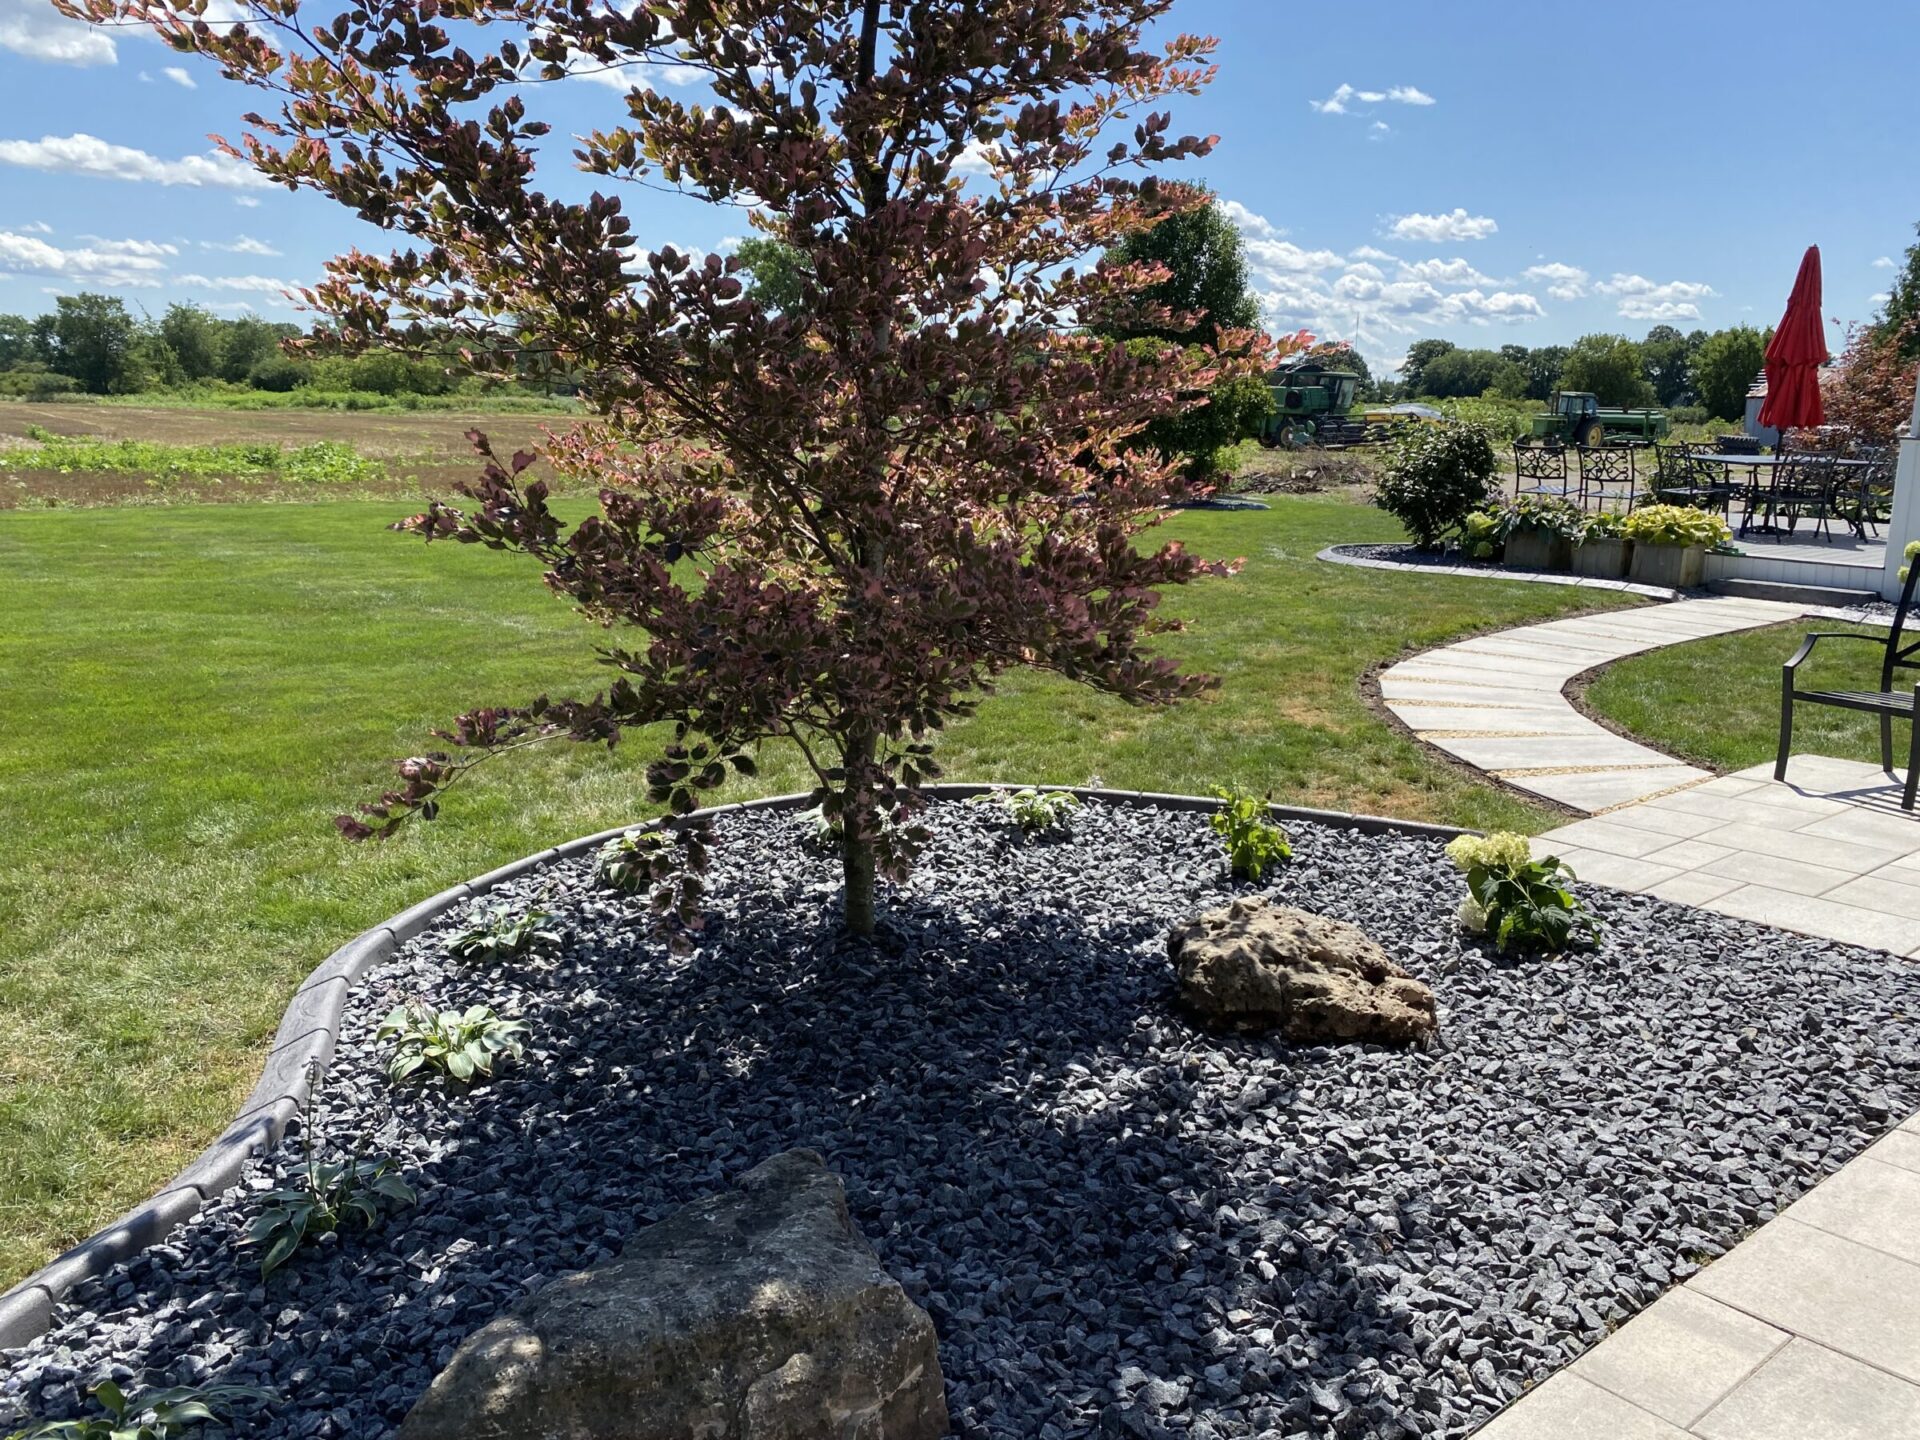 This image depicts a landscaped garden with a purple-leafed tree, black mulch, rocks, stepping stones, outdoor furniture, and a green field background under a blue sky.